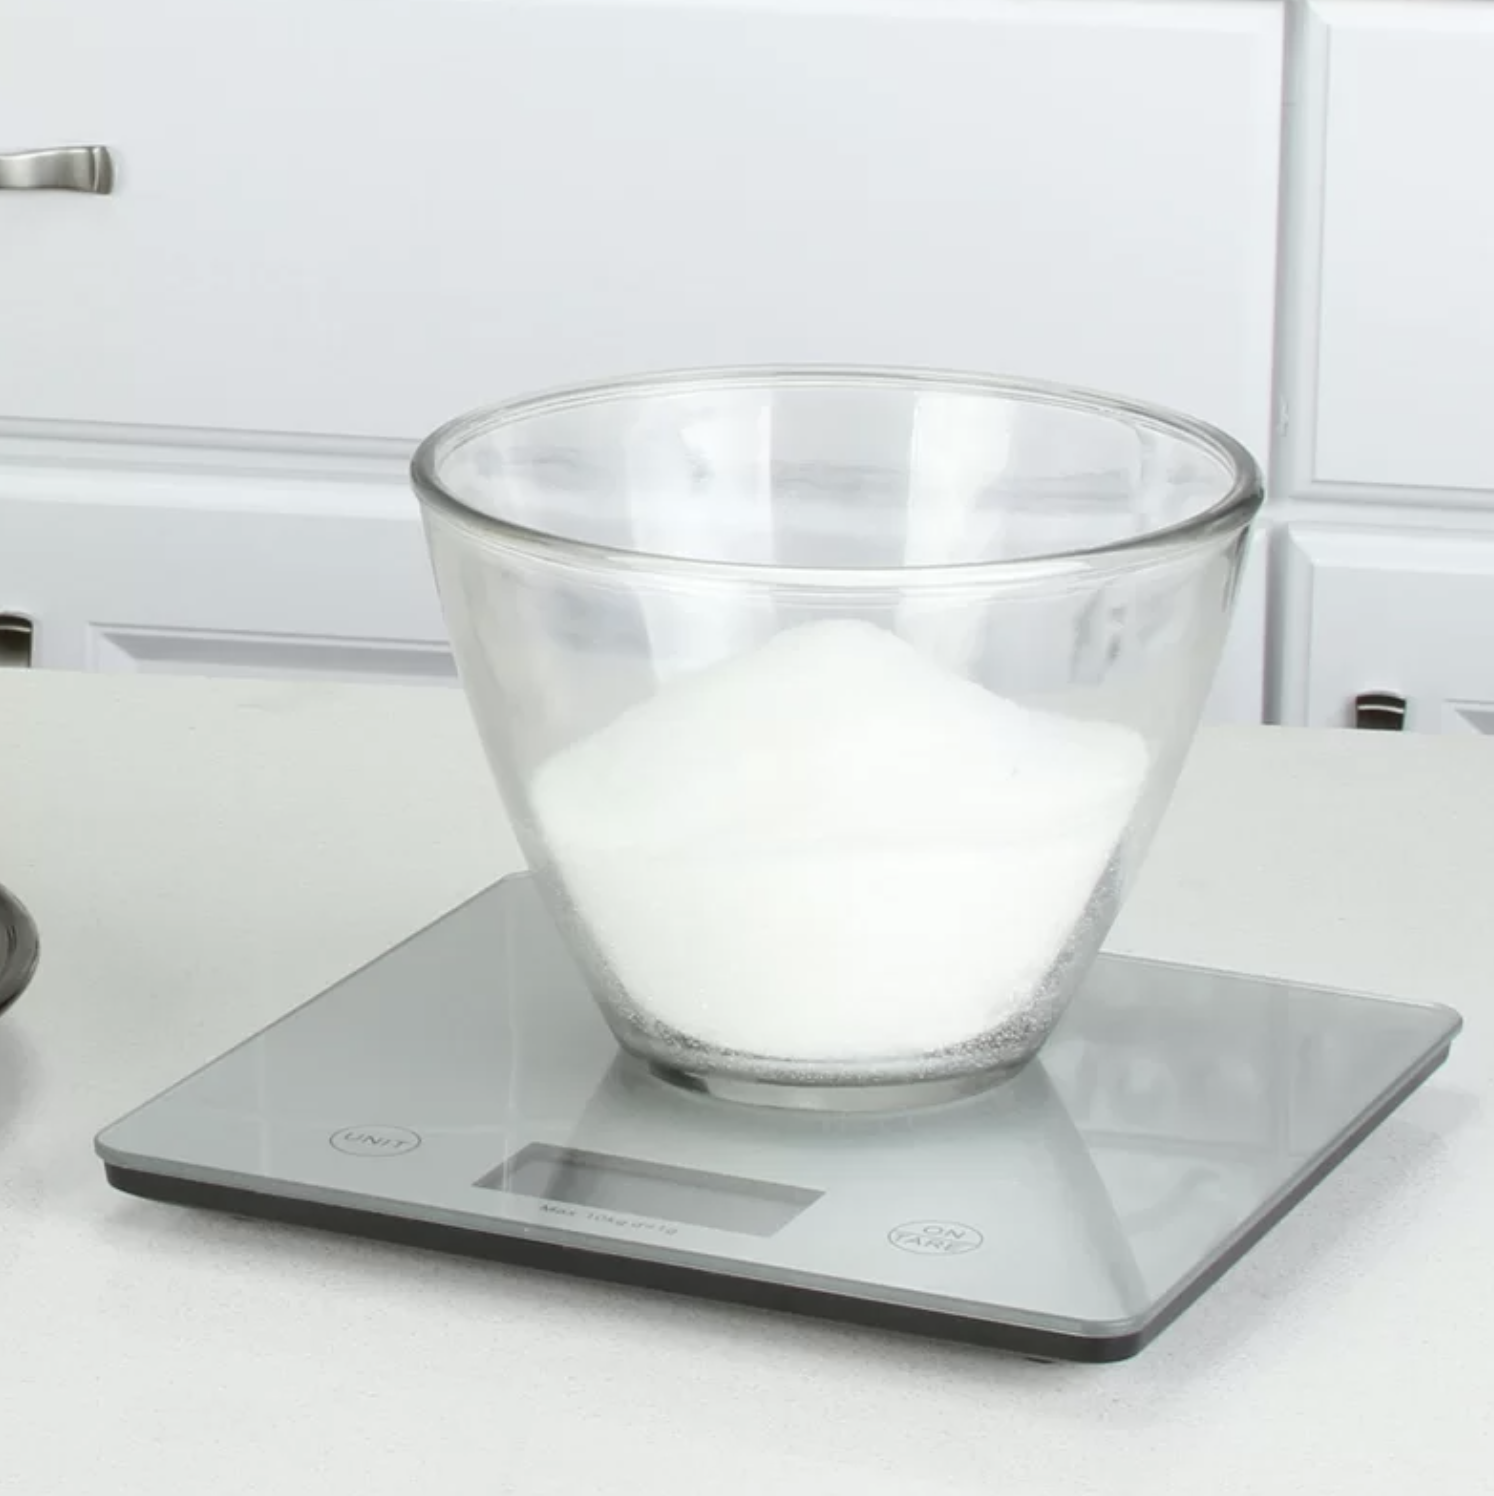 a digital scale weighing a cup of sugar